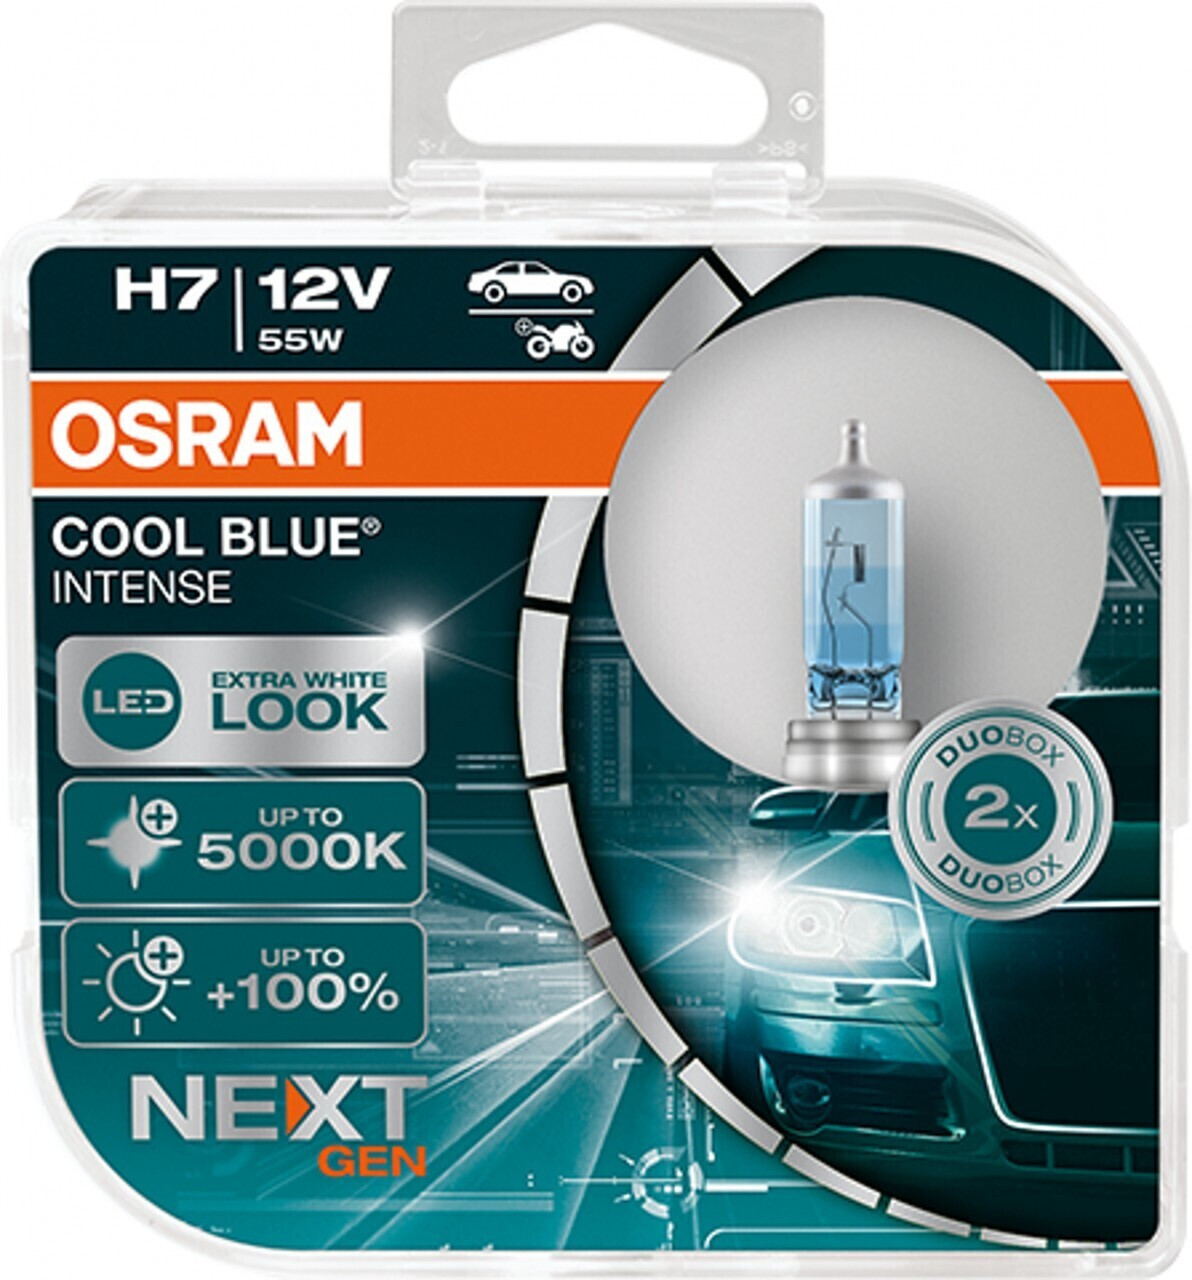 Osram Cool Blue INTENSE H7 12V 55W (64210CBN) Duo desde 18,89 €